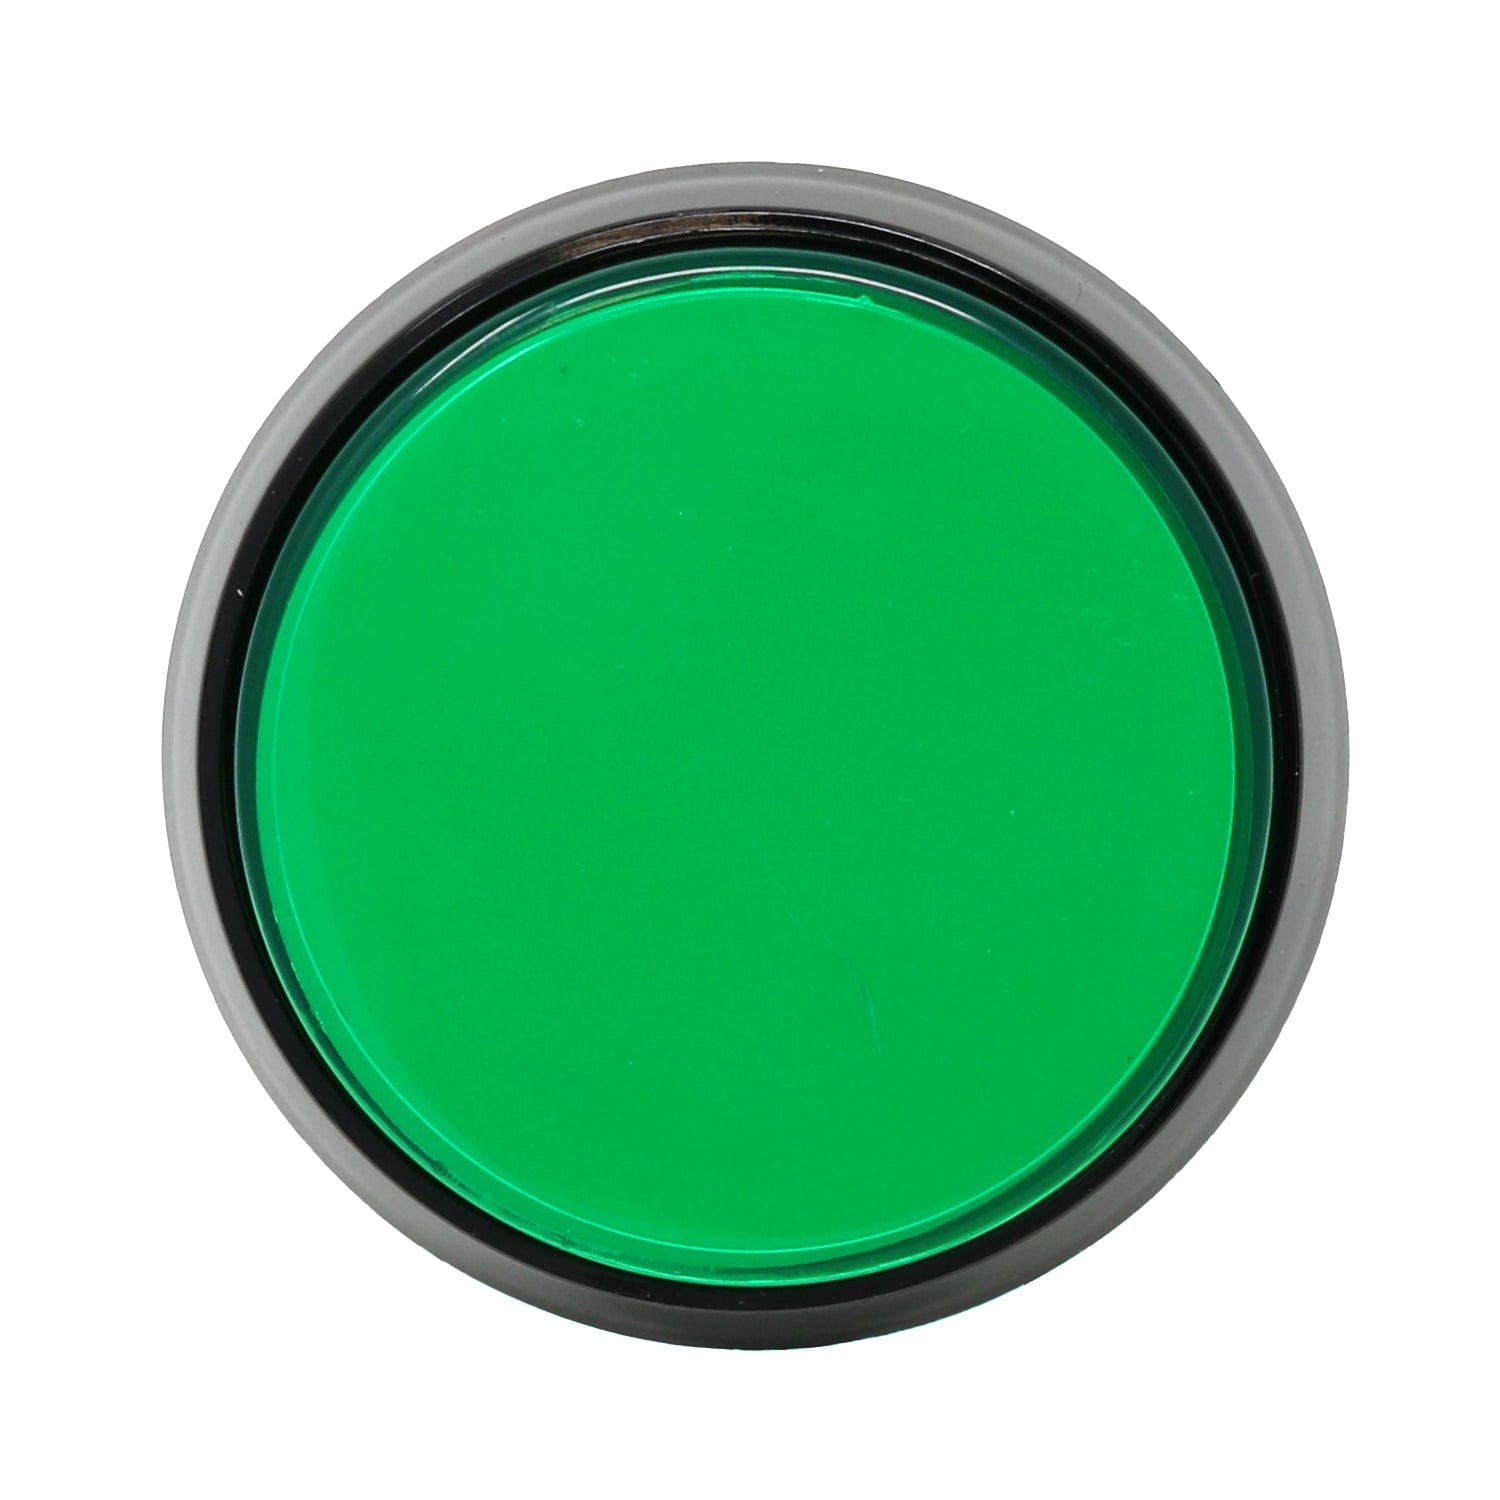 Large Arcade Button with LED - 60mm Green - The Pi Hut